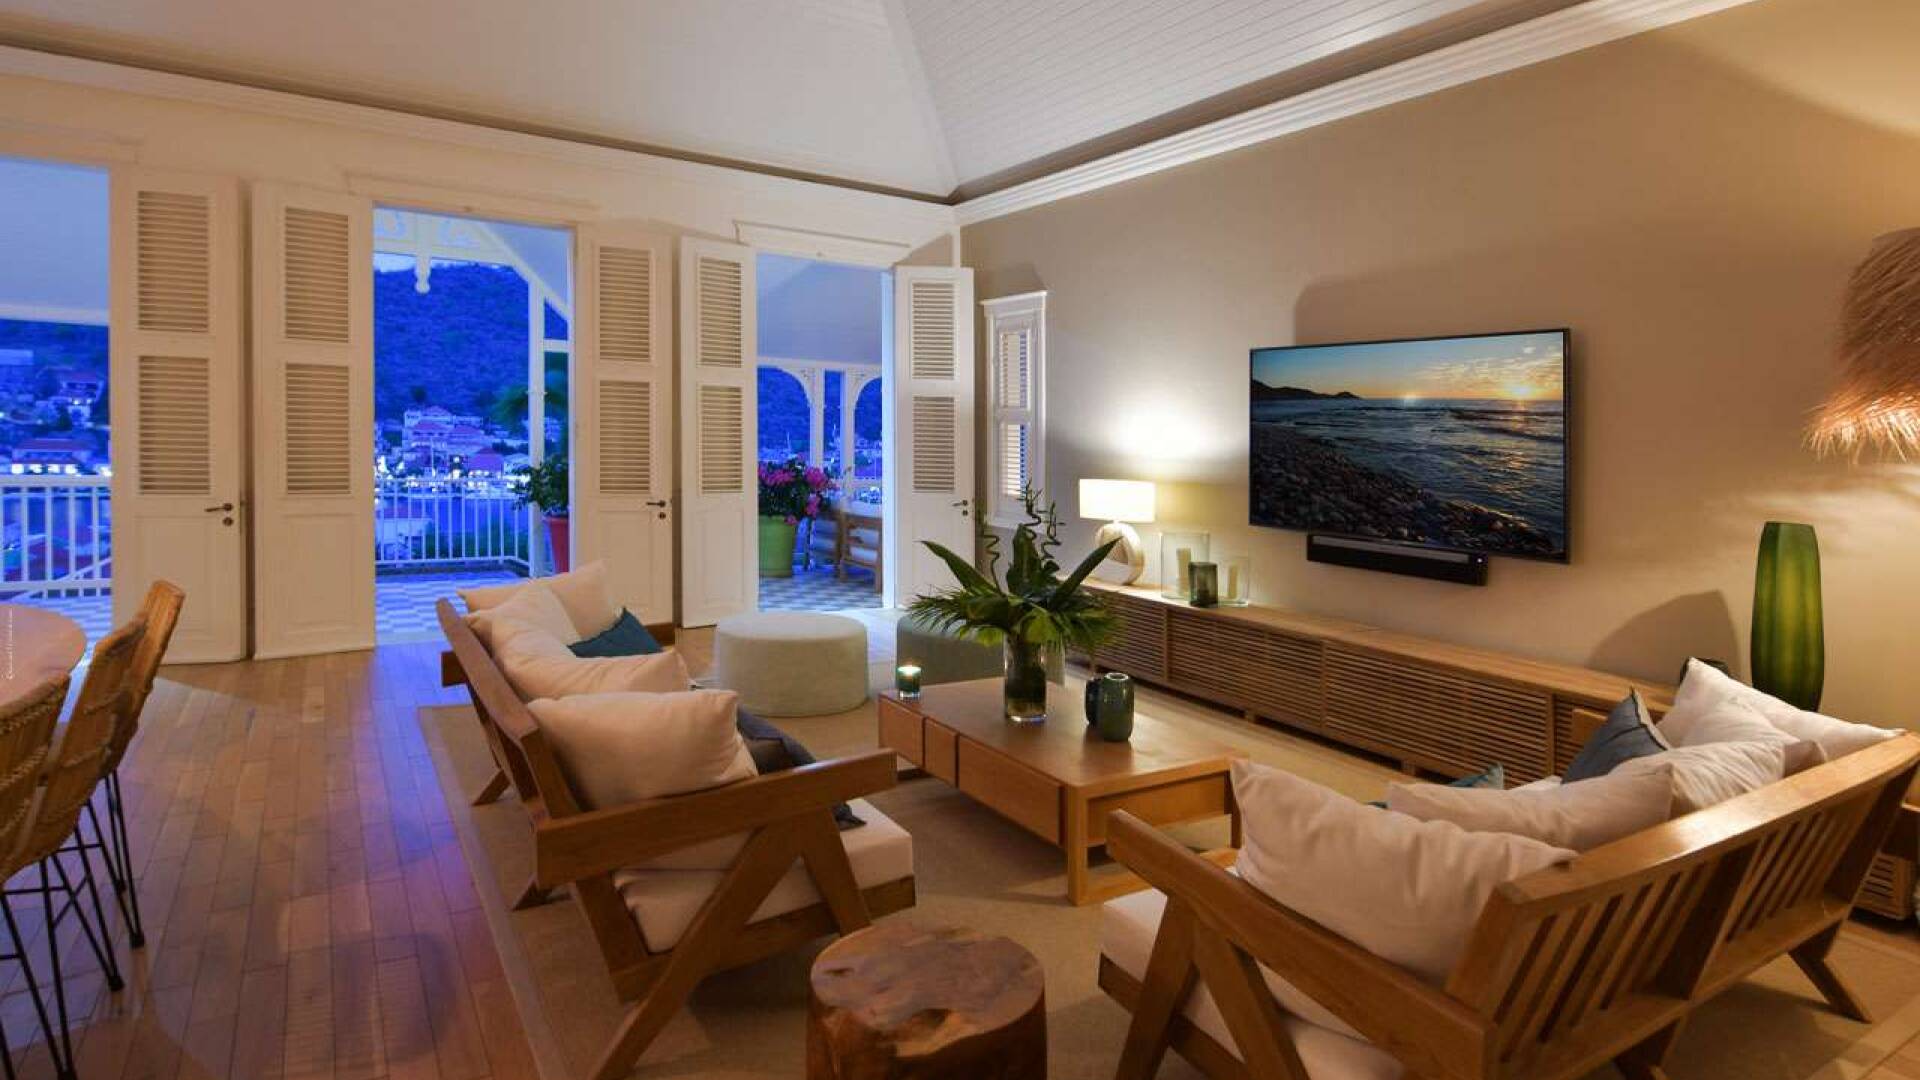 Living Room at WV VGV, Gustavia, St. Barthelemy